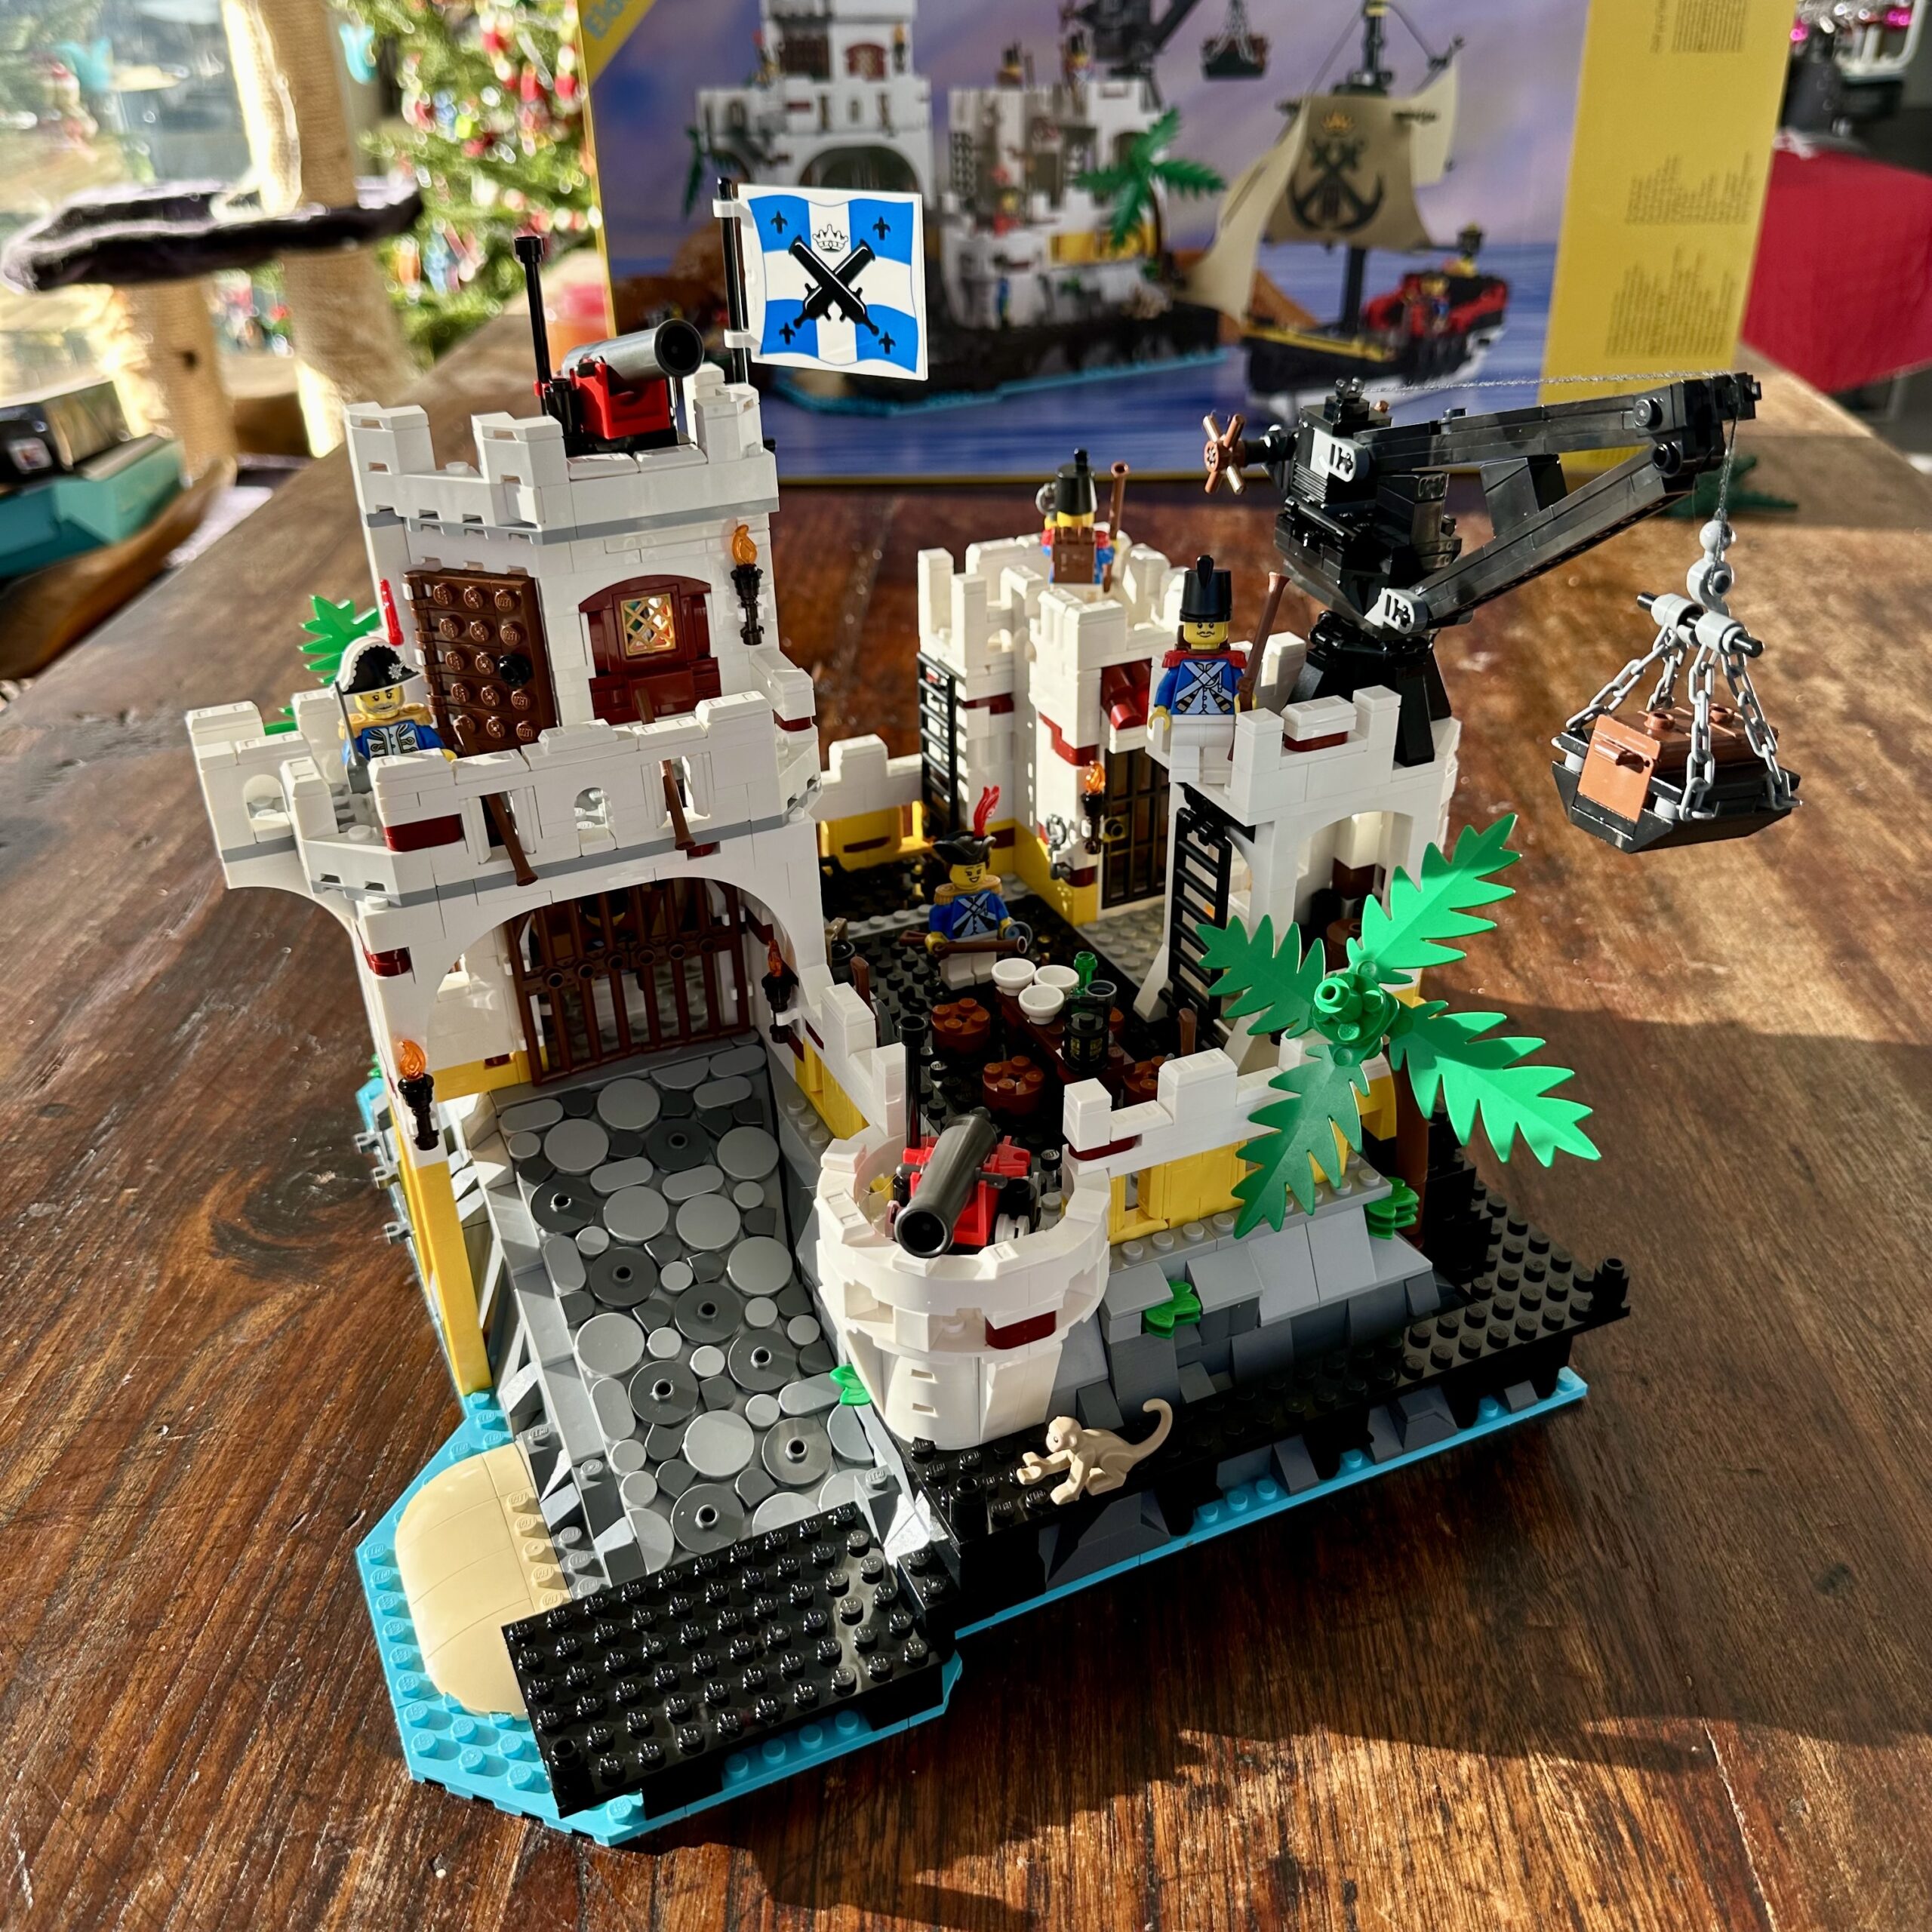 The completed LEGO set 10320 Eldorado Fortress with the sections arranged to form an entirely enclosed square fortress.